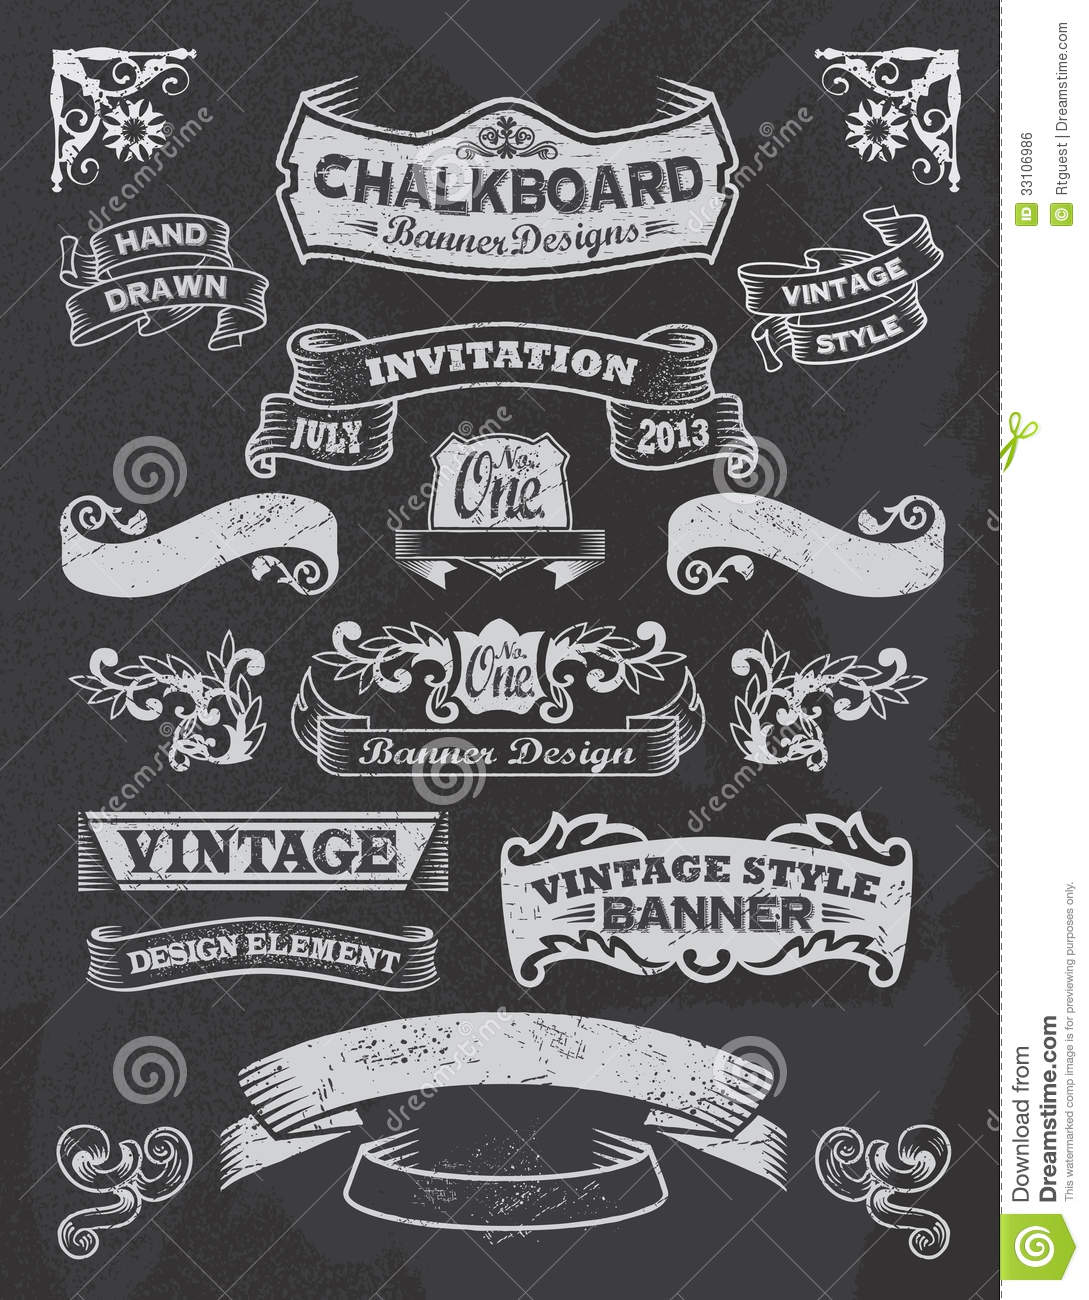 Chalkboard Banner And Ribbon Design Set On A Black Royalty Free Stock    